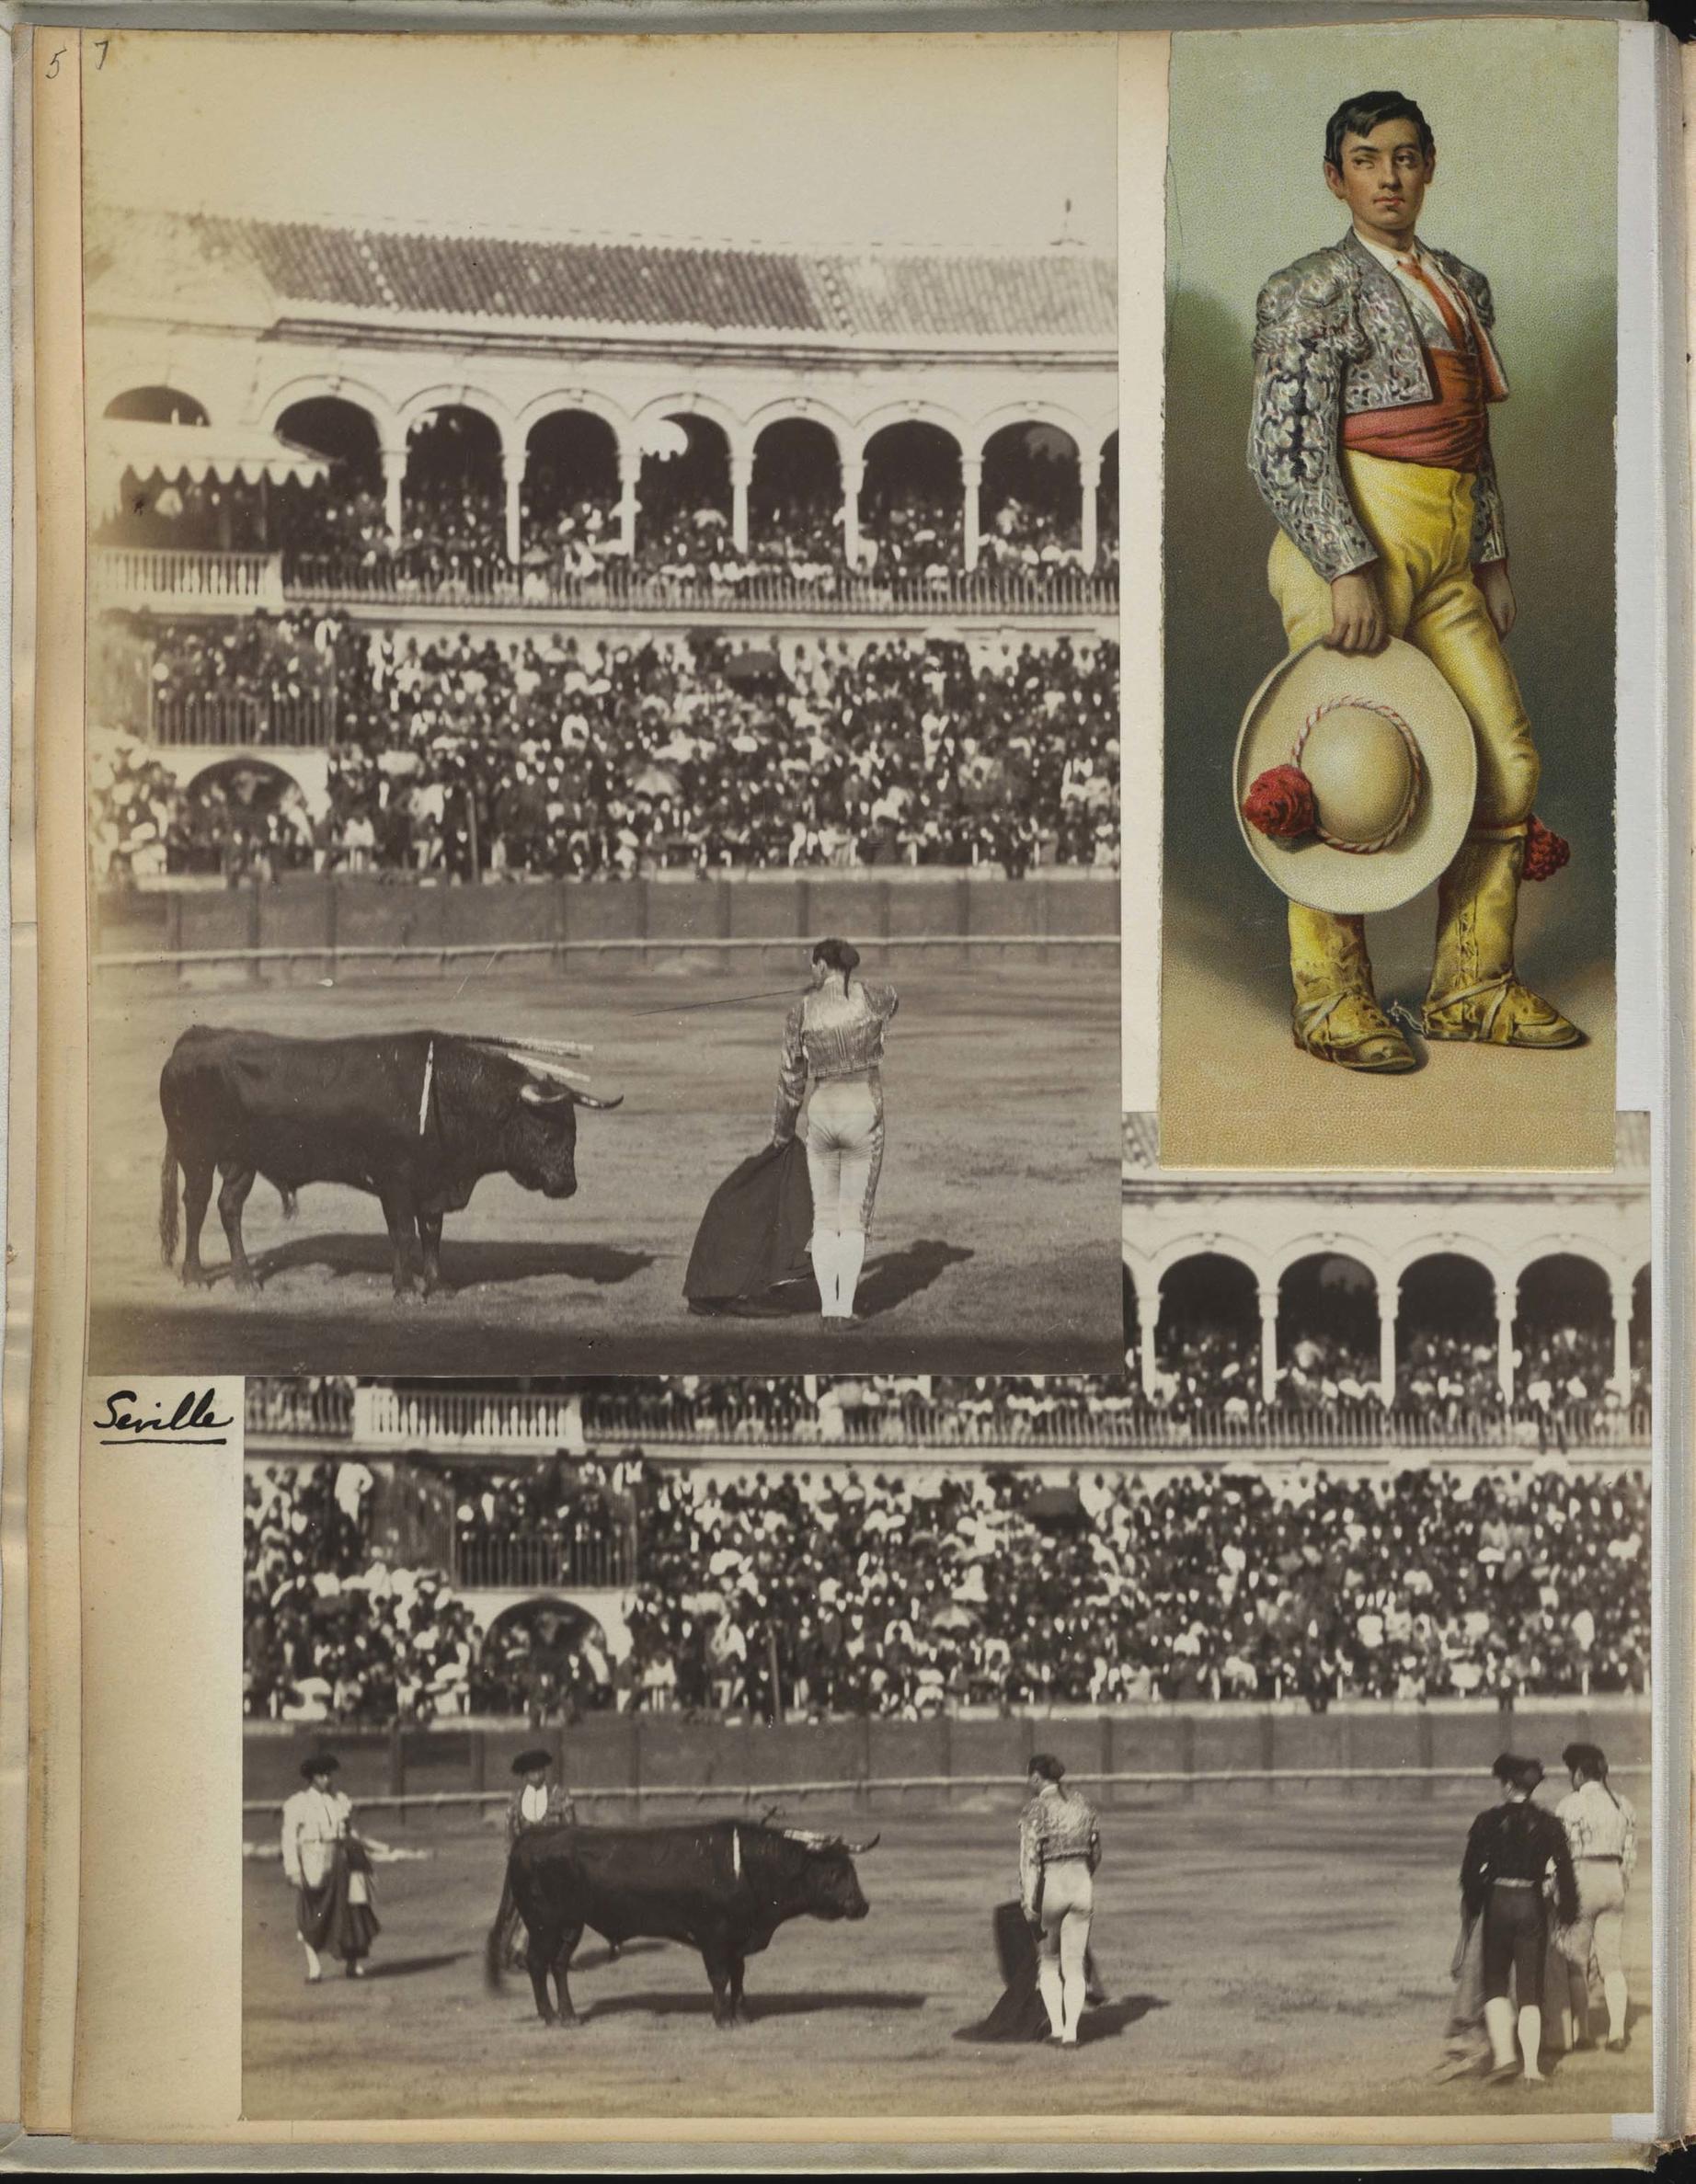 Photos of Spanish matador in a bullfighting ring in Seville in front of a full crowd in the stands